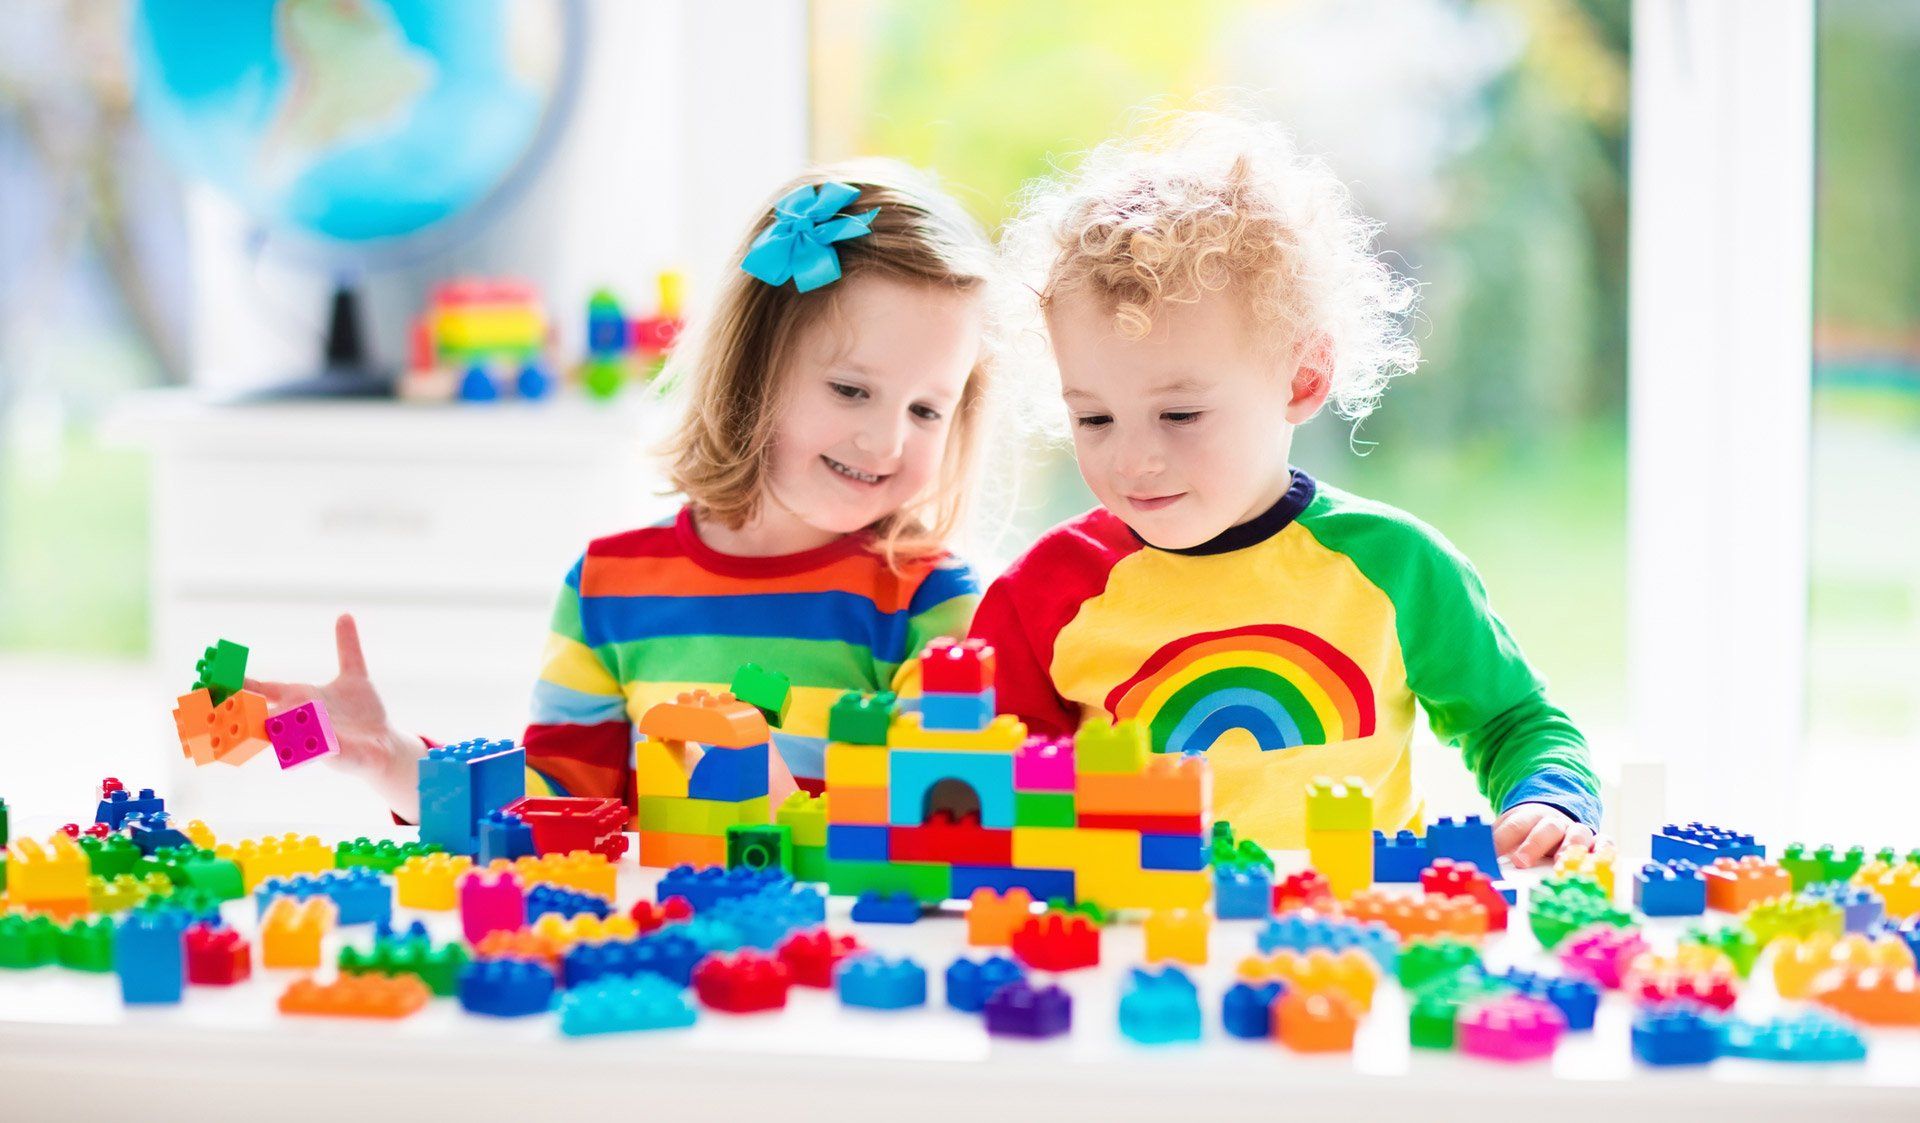 two young children play with building blocks